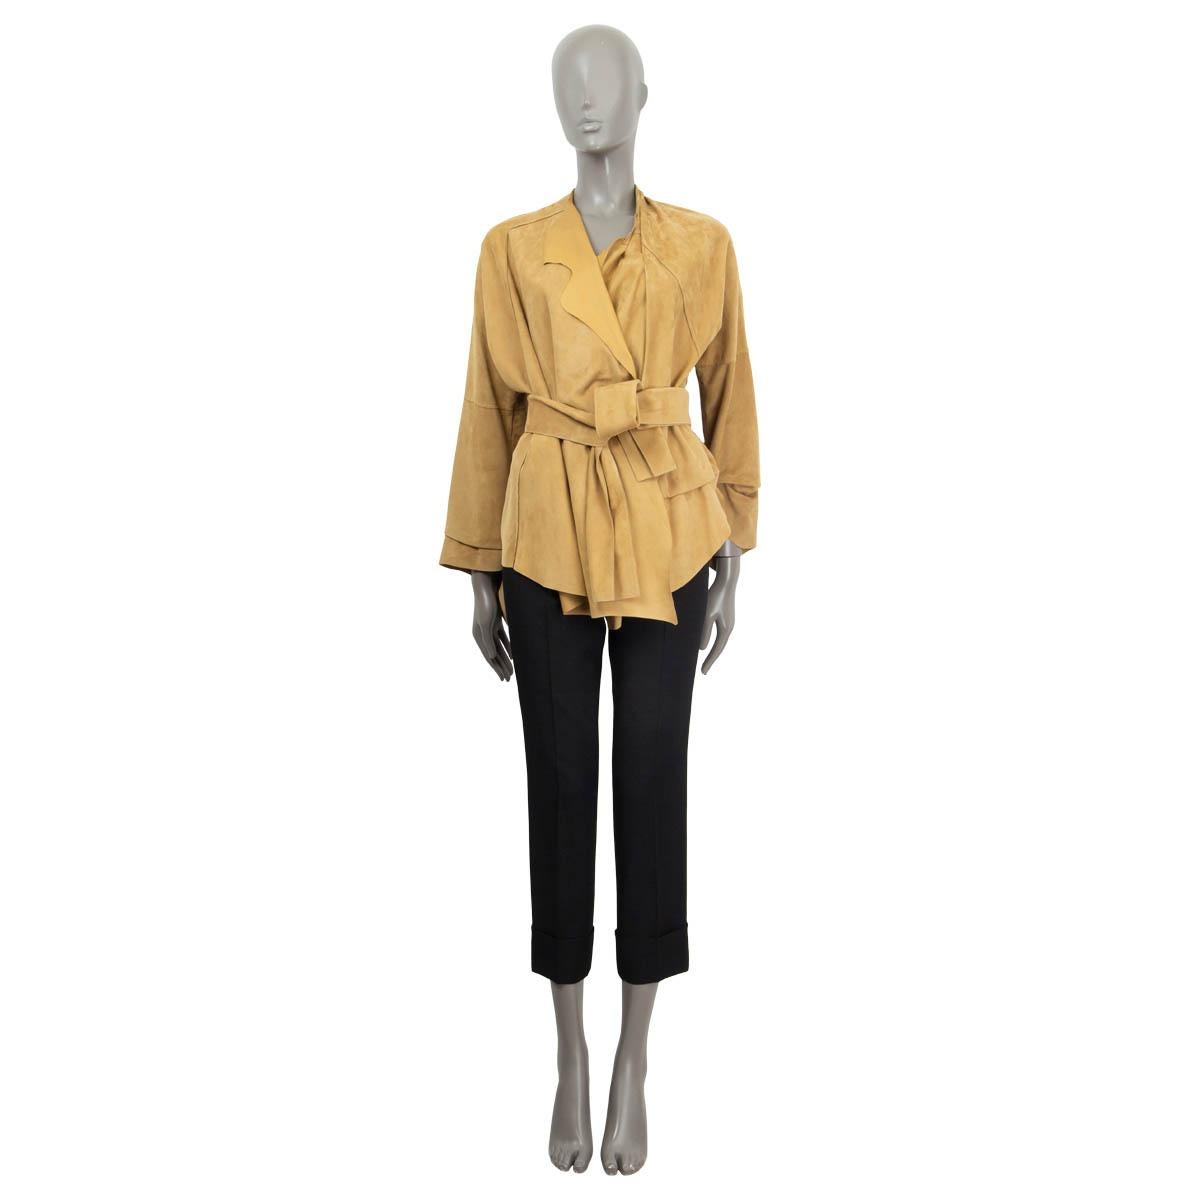 100% authentic Loewe draped jacket in beige suede. Features long raglan sleeves (sleeve measurements taken from the neck) and a detachable suede belt. Unlined. Has been worn and is in excellent condition. 

Spring/summer 2016

Measurements
Tag